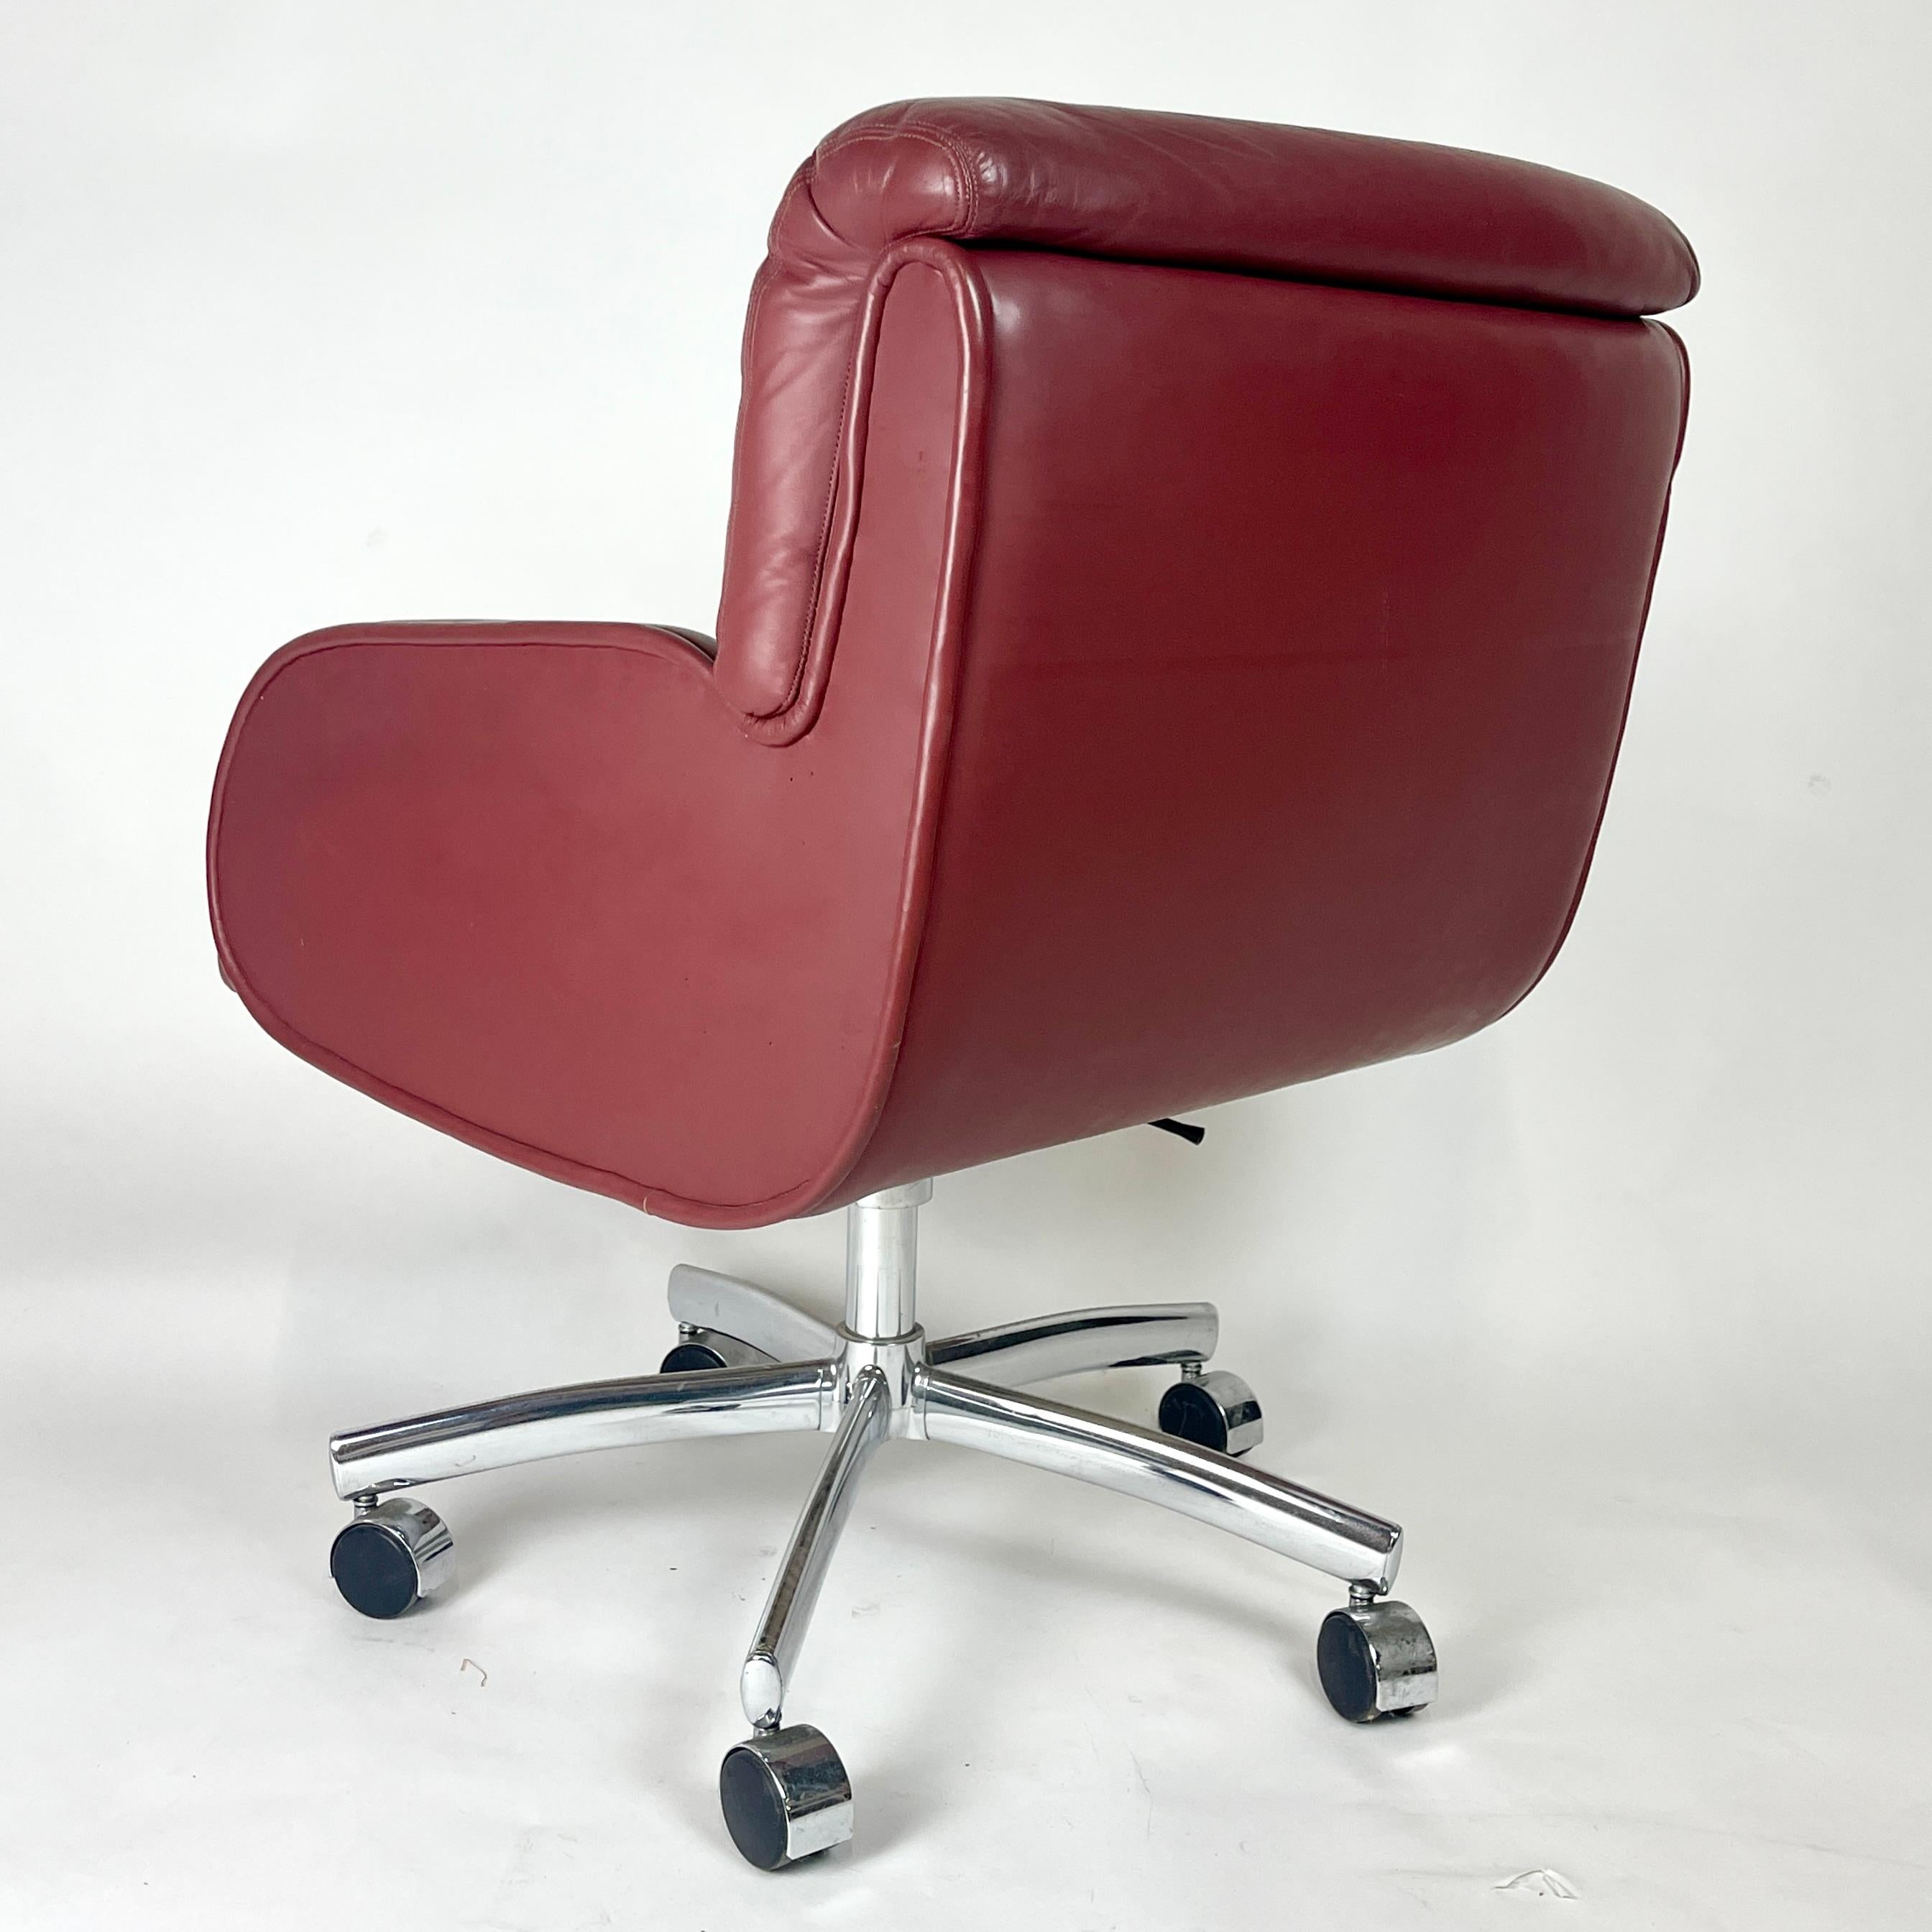 Roger Lee Sprunger for Dunbar Elegant Leather Office Chairs 10 Available In Good Condition For Sale In Hudson, NY